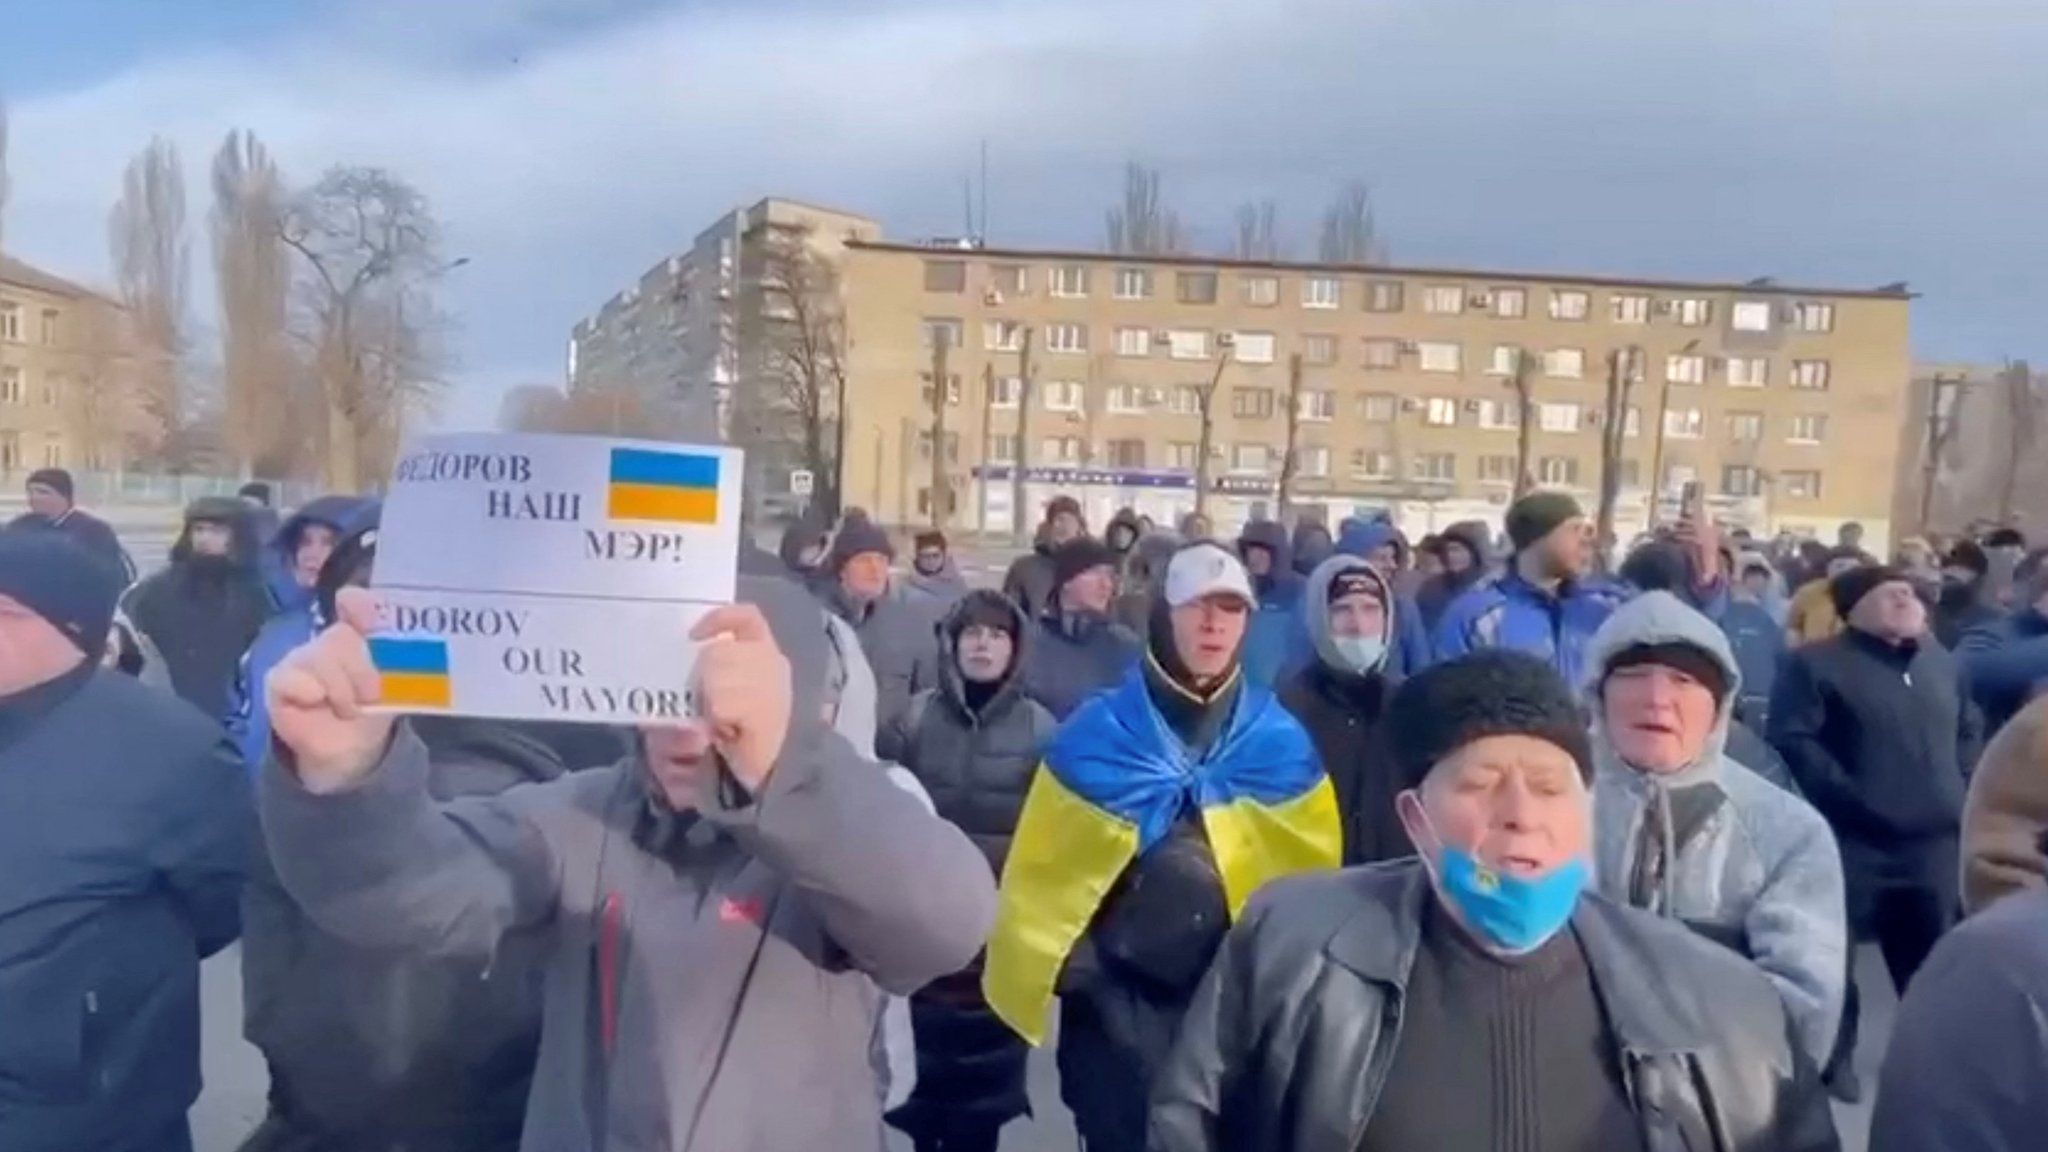 People protest the abduction of Mayor Ivan Federov, outside the Melitopol regional administration building, after he was reportedly taken away by Russian forces, during their ongoing invasion, in Melitopol, Ukraine in this still image obtained from handout video released March 12, 2022. Courtesy of Deputy Head for President